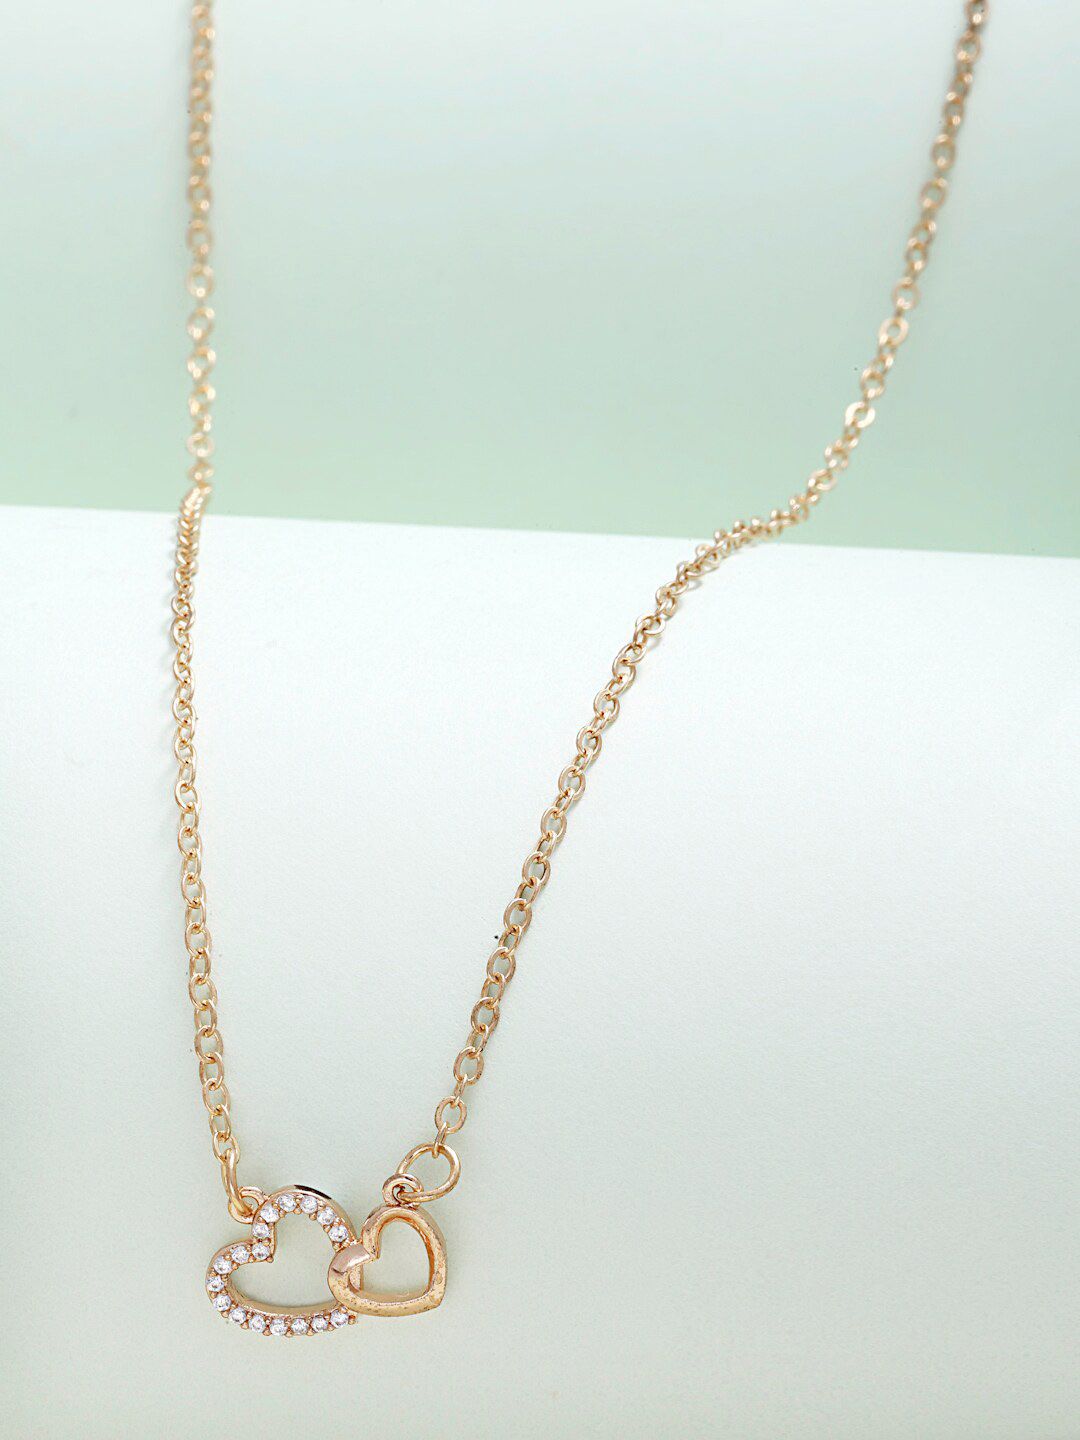 Ferosh Gold-Toned & White Stone-Studded Heart-Shaped Necklace Price in India